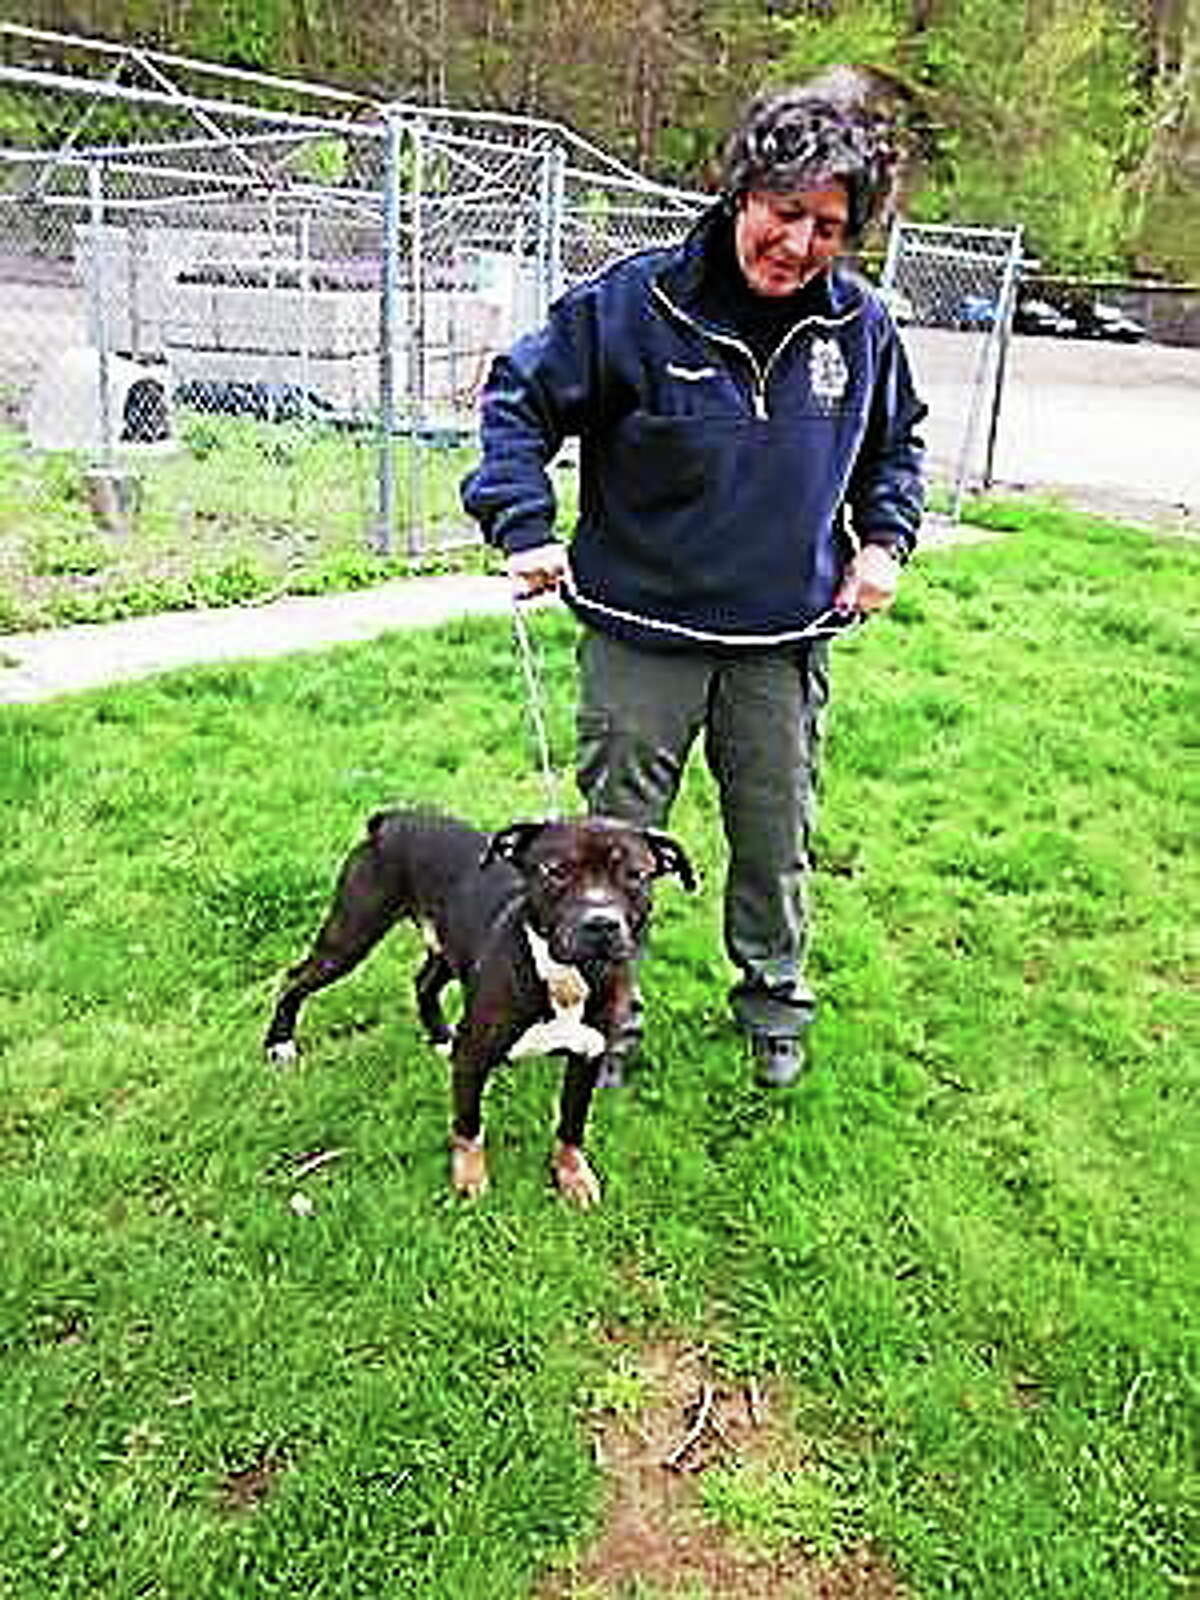 Woodbridge animal control officer back on job after cruelty charge dismissed